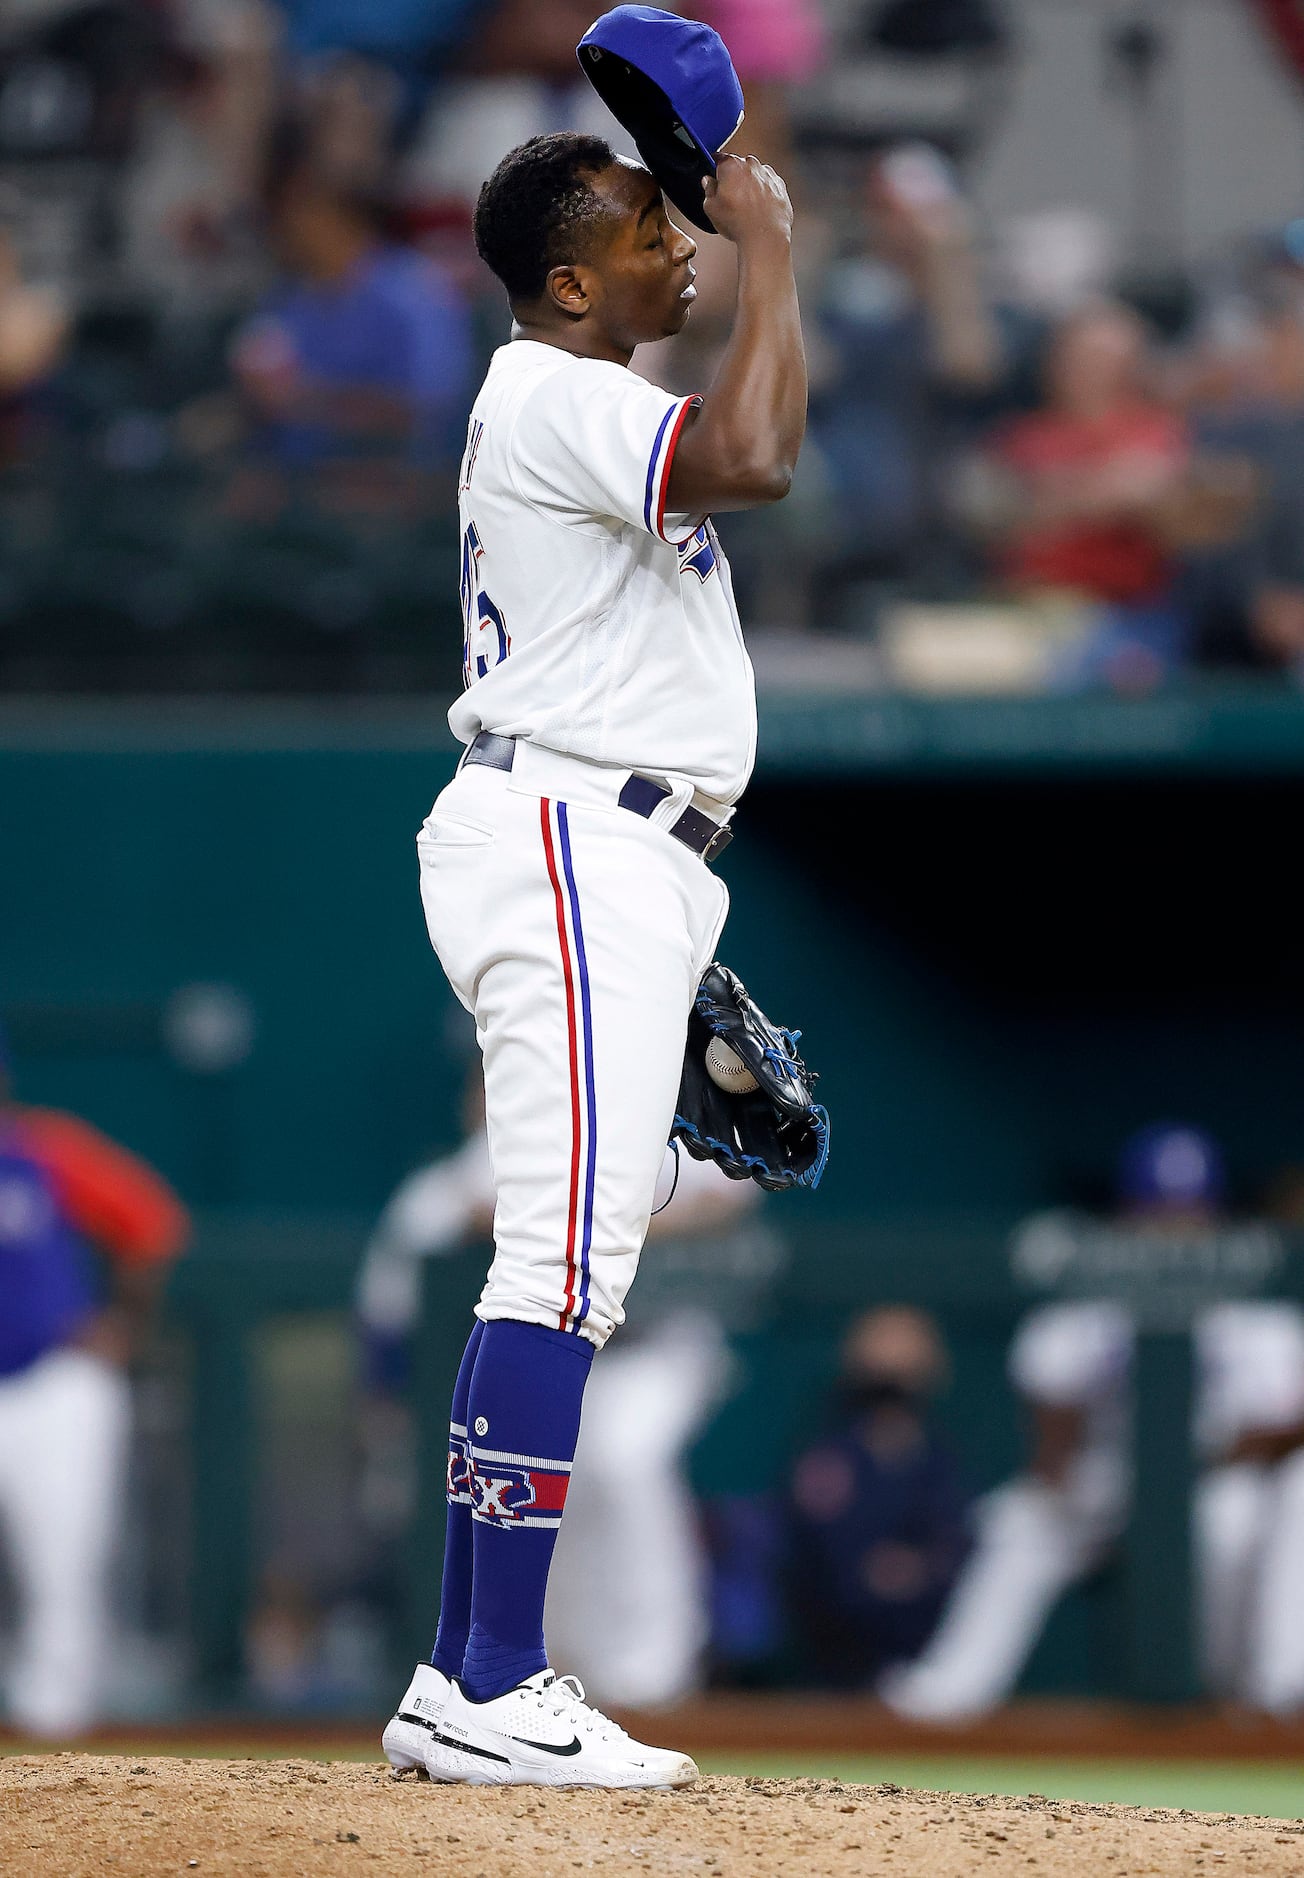 Adrian Beltre & Chuck Morgan to be Inducted into Rangers Baseball